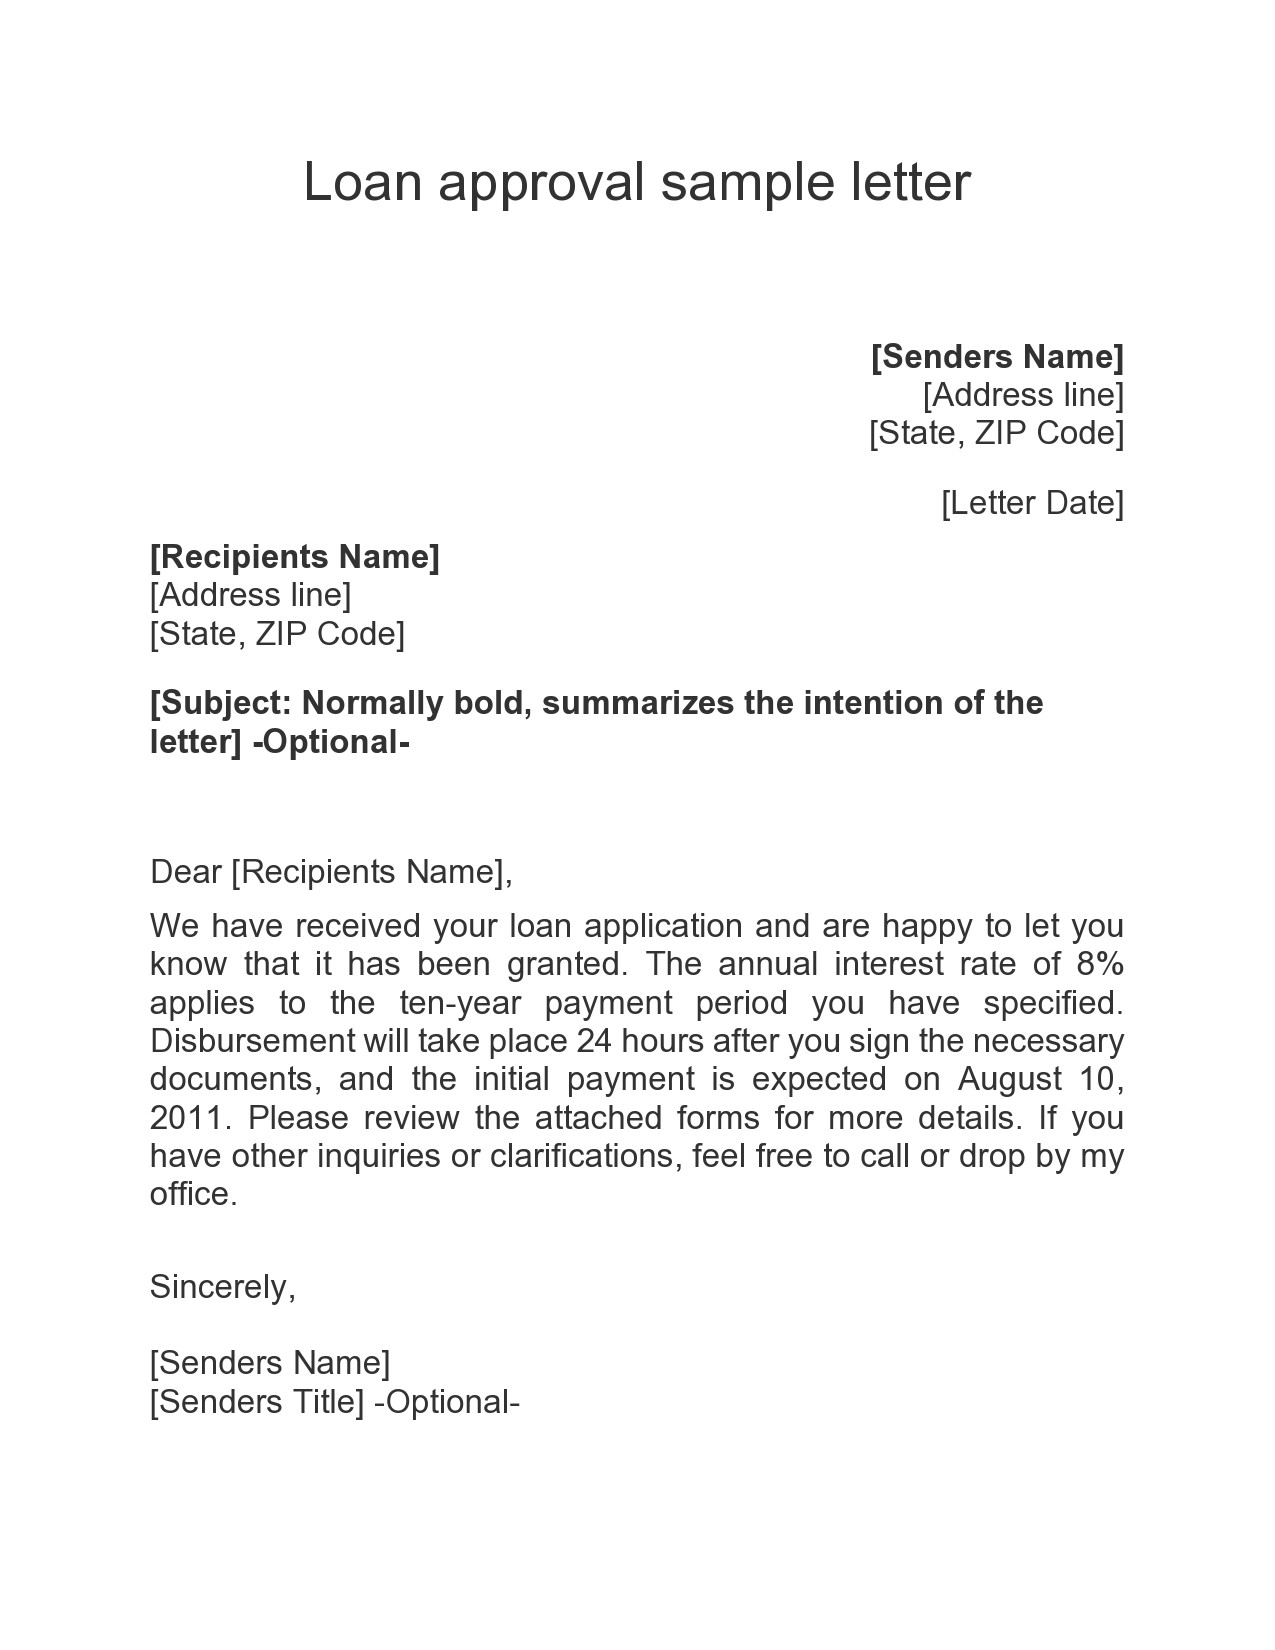 Free pre approval letter 13